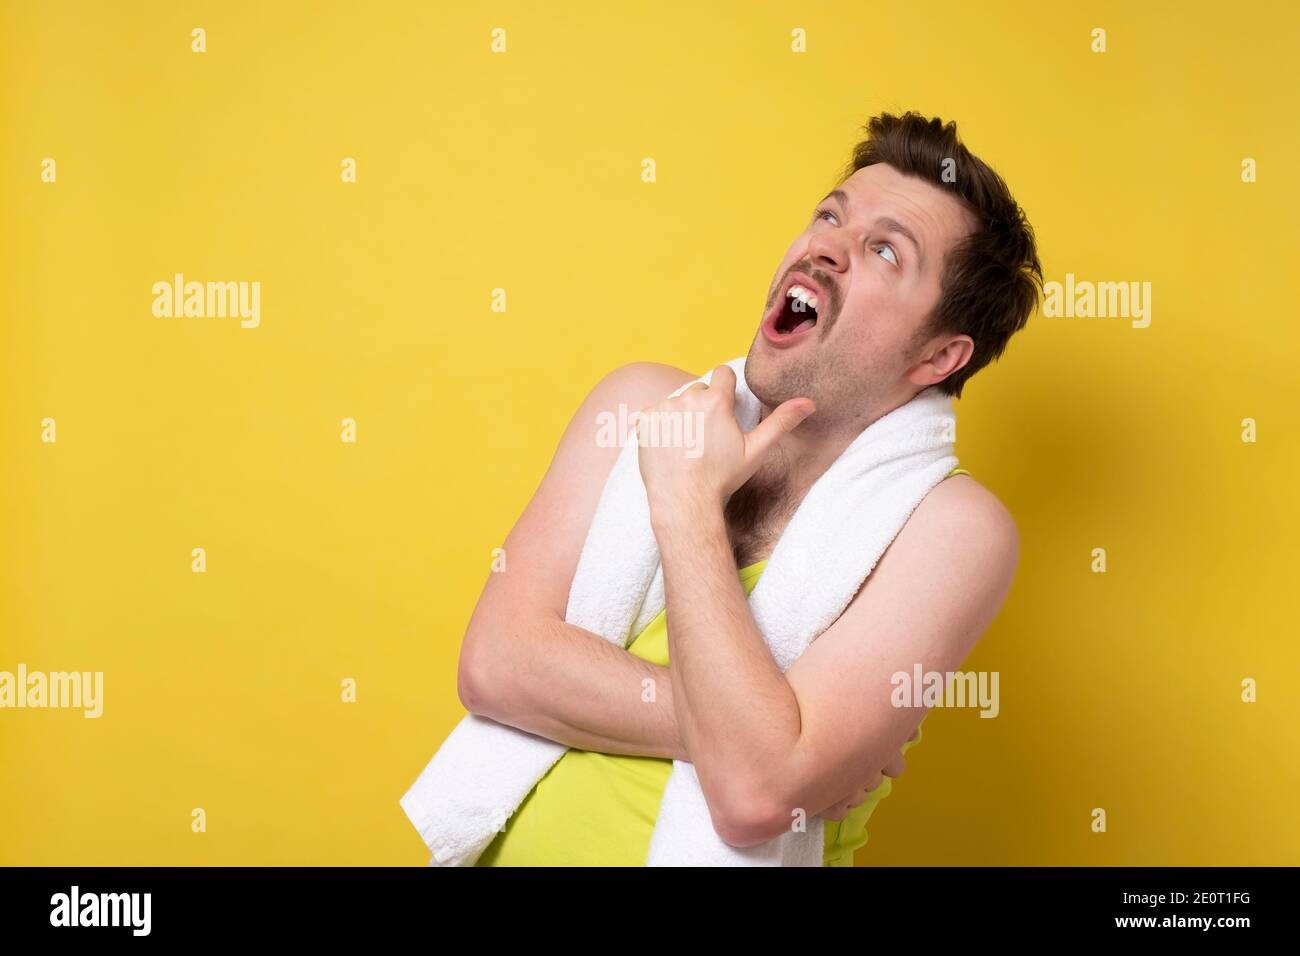 Young caucasian sport man with towel being surprised looking up. Studio shot on yellow wall. Stock Photo